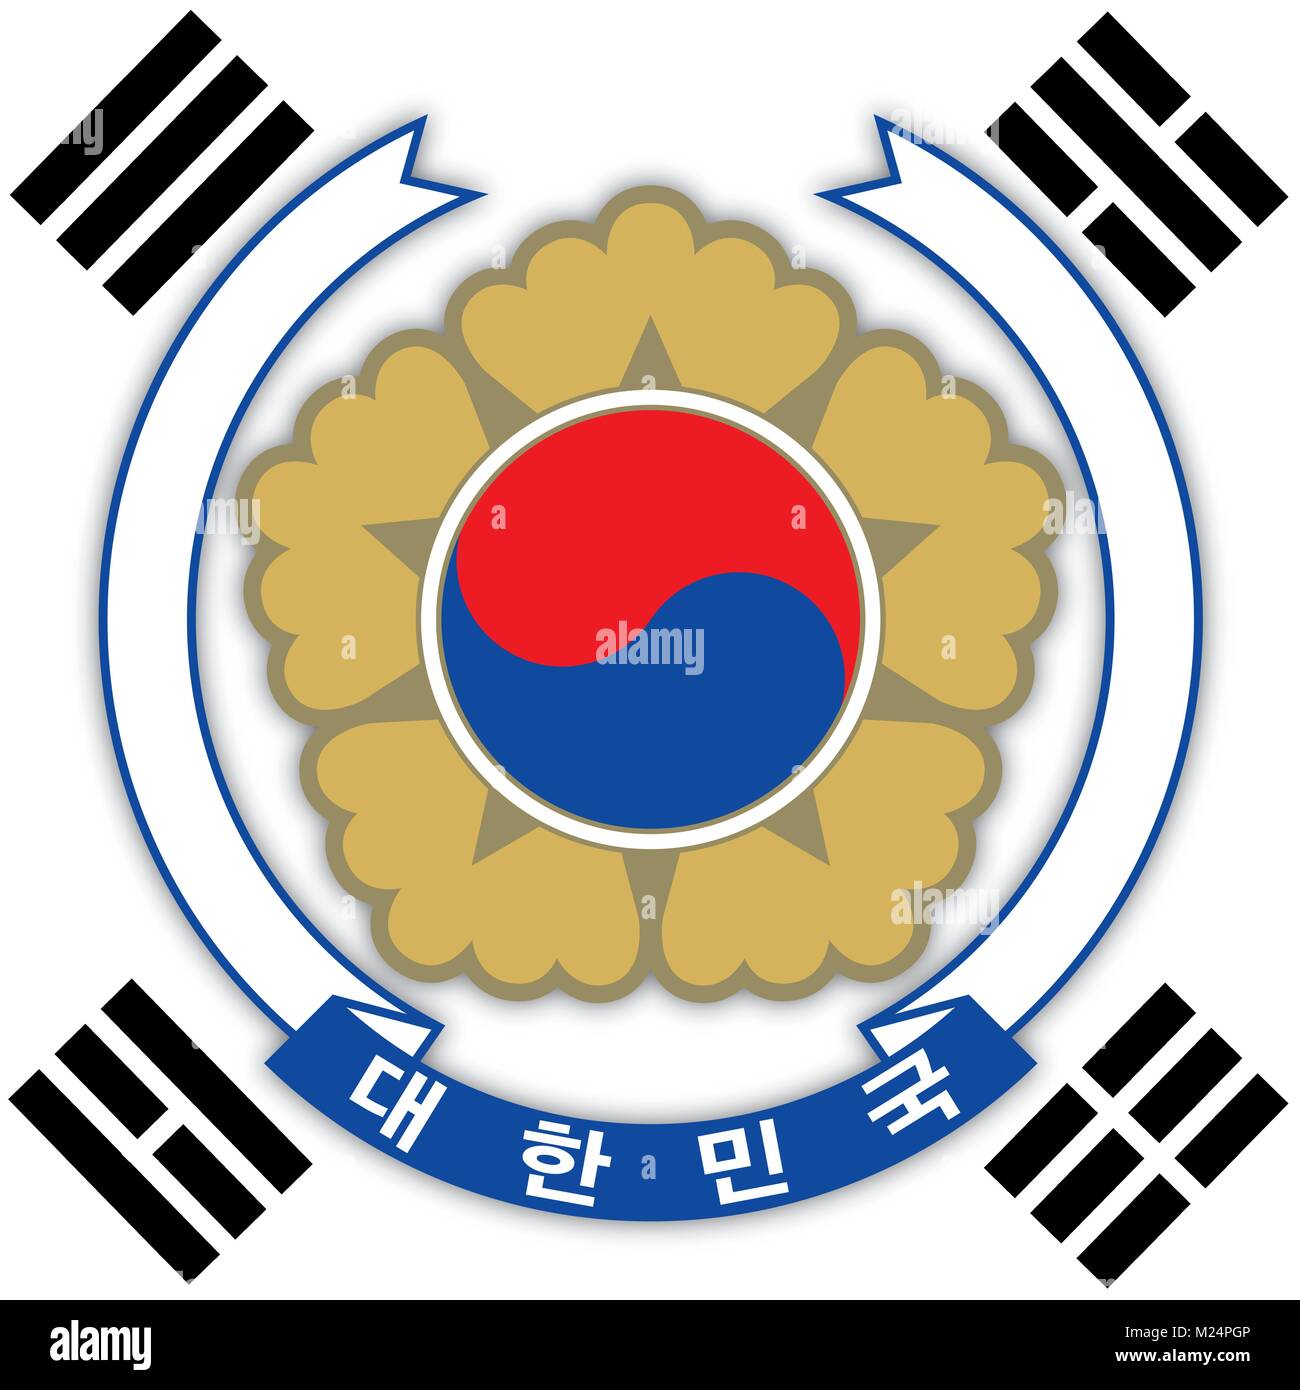 South Korea coat of arms and flag, official symbols of the nation Stock Vector